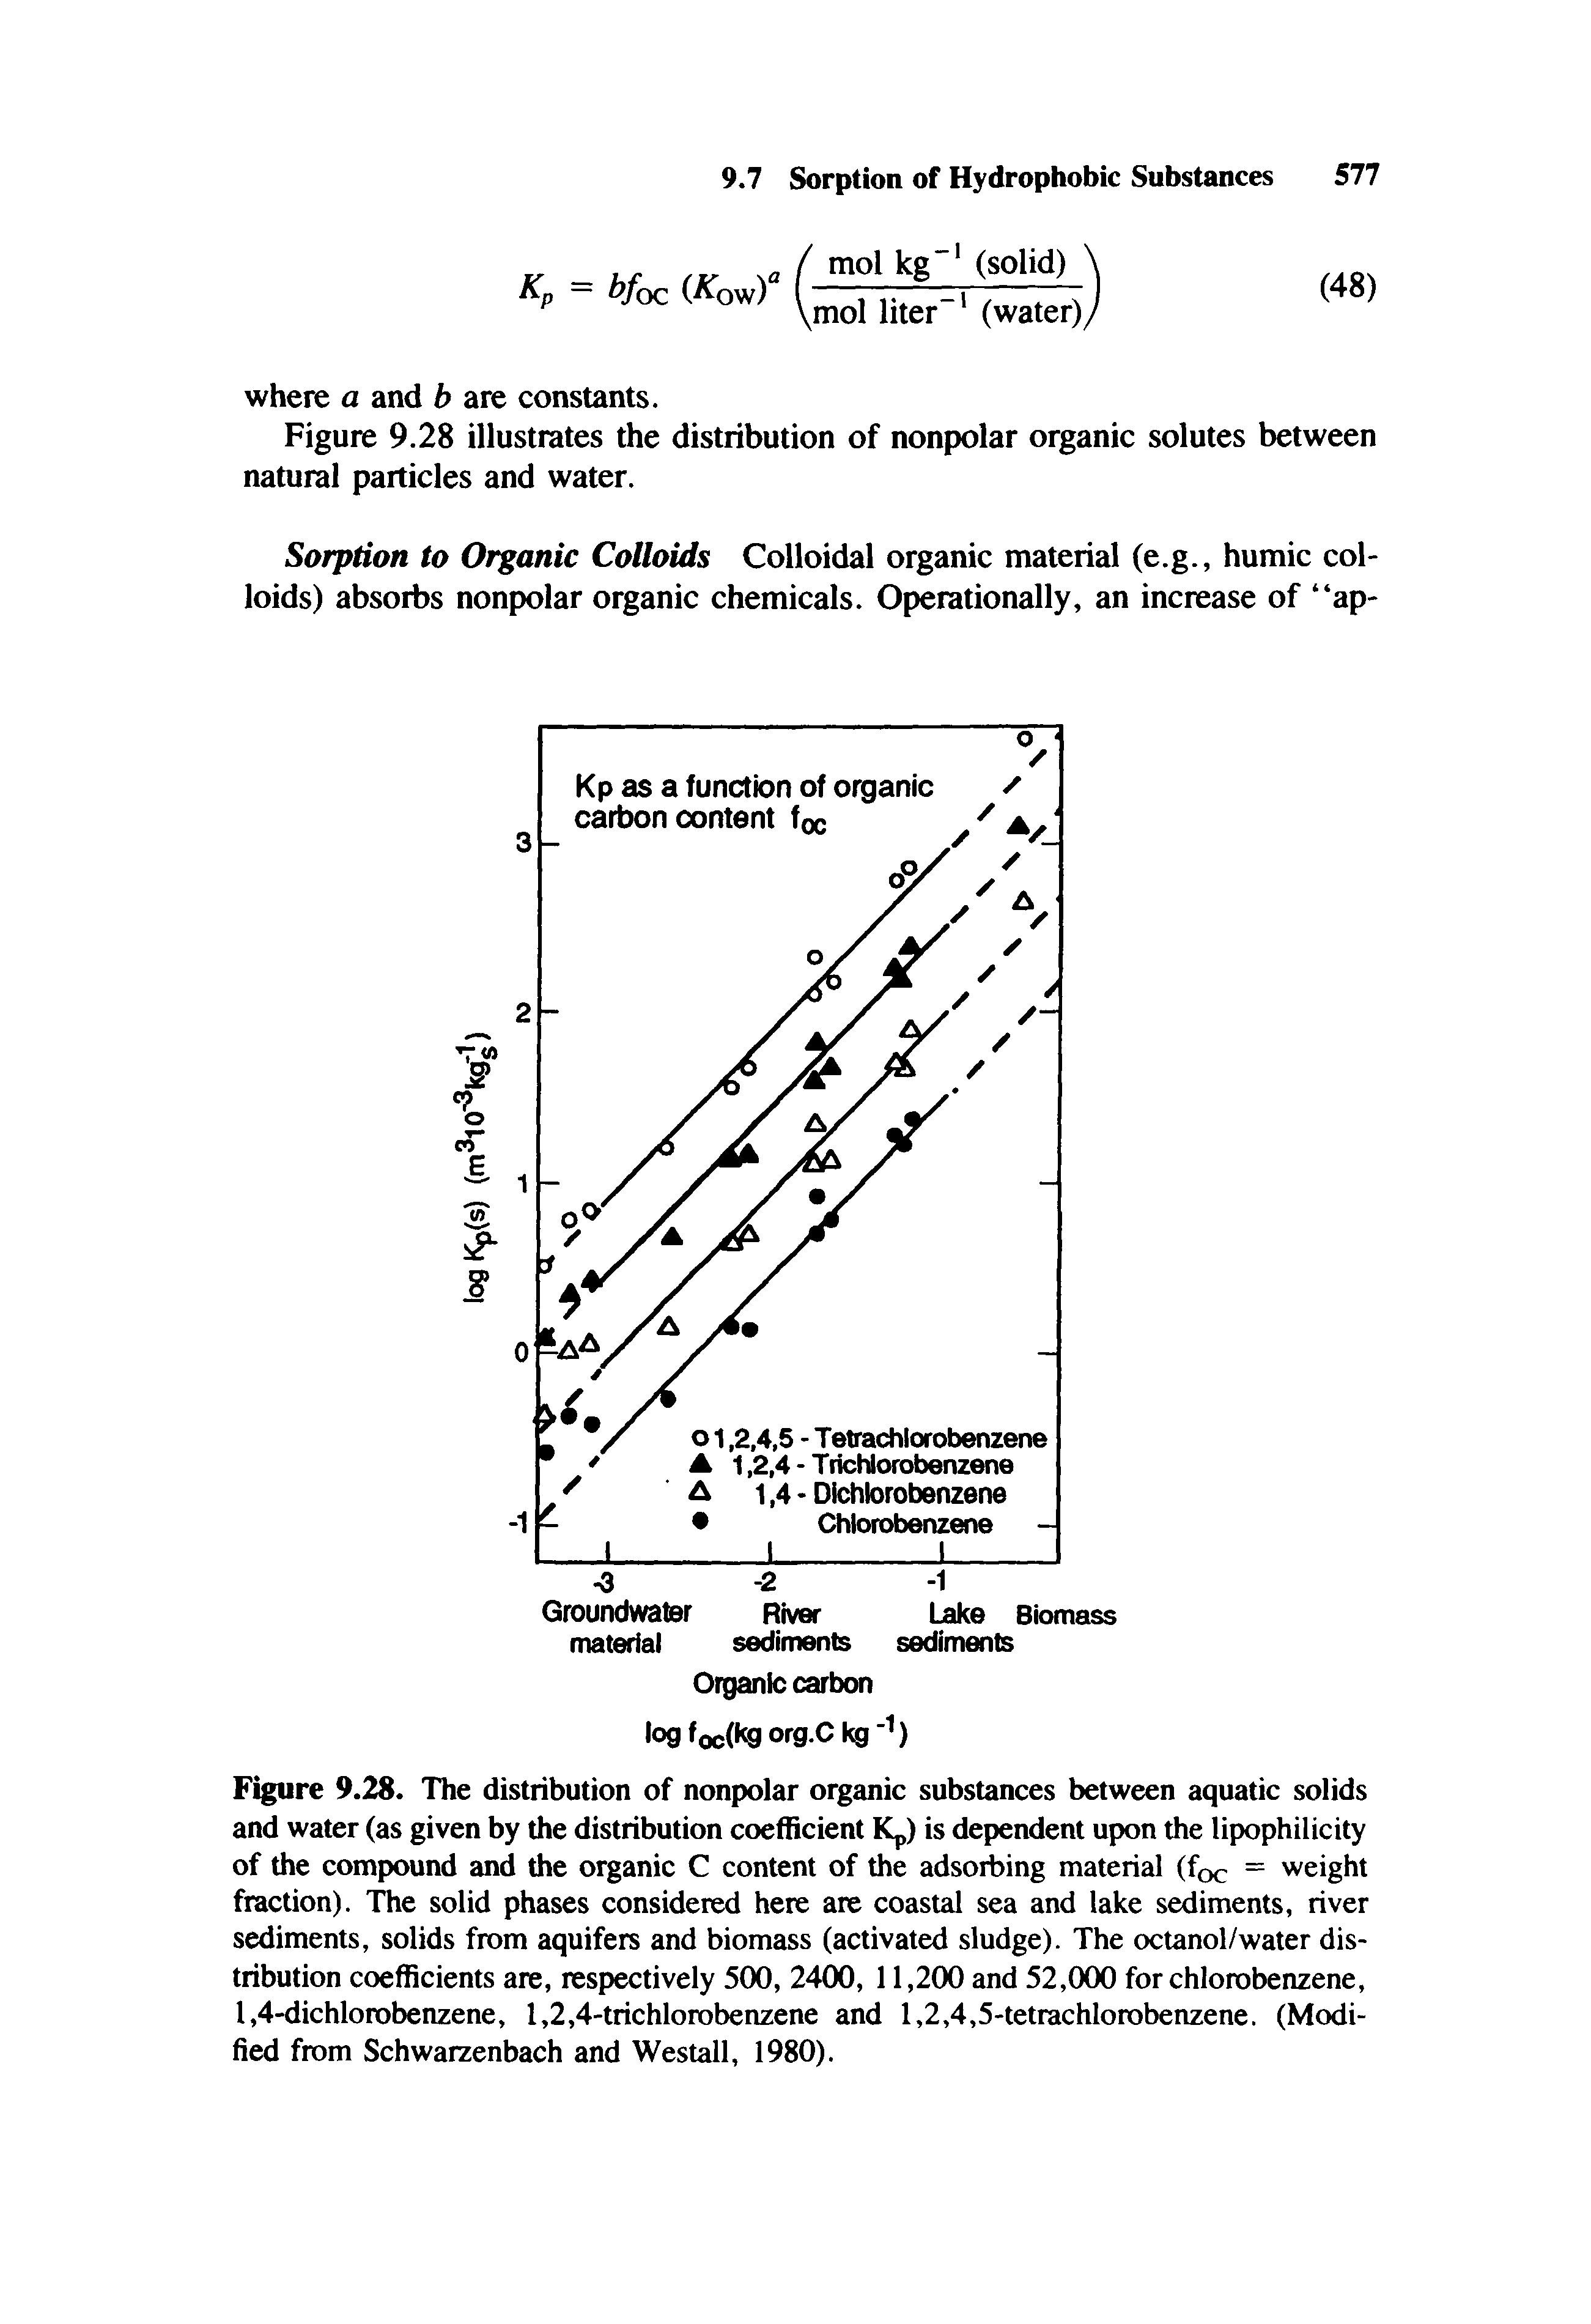 Figure 9.28. The distribution of nonpolar organic substances between aquatic solids and water (as given by the distribution coefficient Kp) is dependent upon the lipophilicity of the compound and the organic C content of the adsorbing material (foe = weight fraction). The solid phases considered here are coastal sea and lake sediments, river sediments, solids from aquifers and biomass (activated sludge). The octanol/water distribution coefficients are, respectively 500, 2400, 11,200 and 52,000 for chlorobenzene, 1,4-dichlorobenzene, 1,2,4-trichlorobenzene and 1,2,4,5-tetrachlorobenzene. (Modified from Schwarzenbach and Westall, 1980).